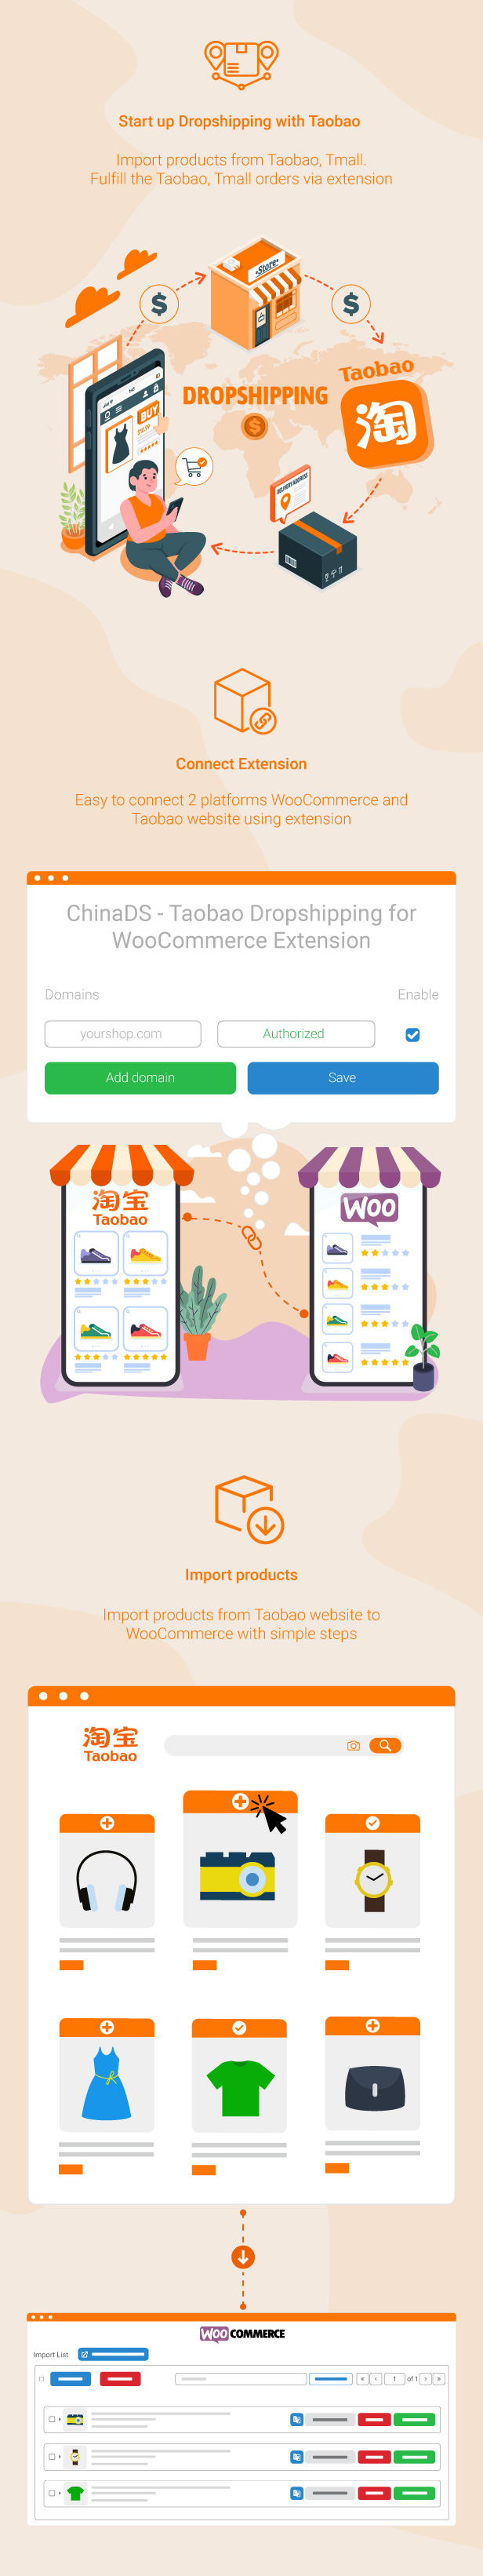 ChinaDS – WooCommerce Tmall-Taobao Dropshipping Inforaphic 1